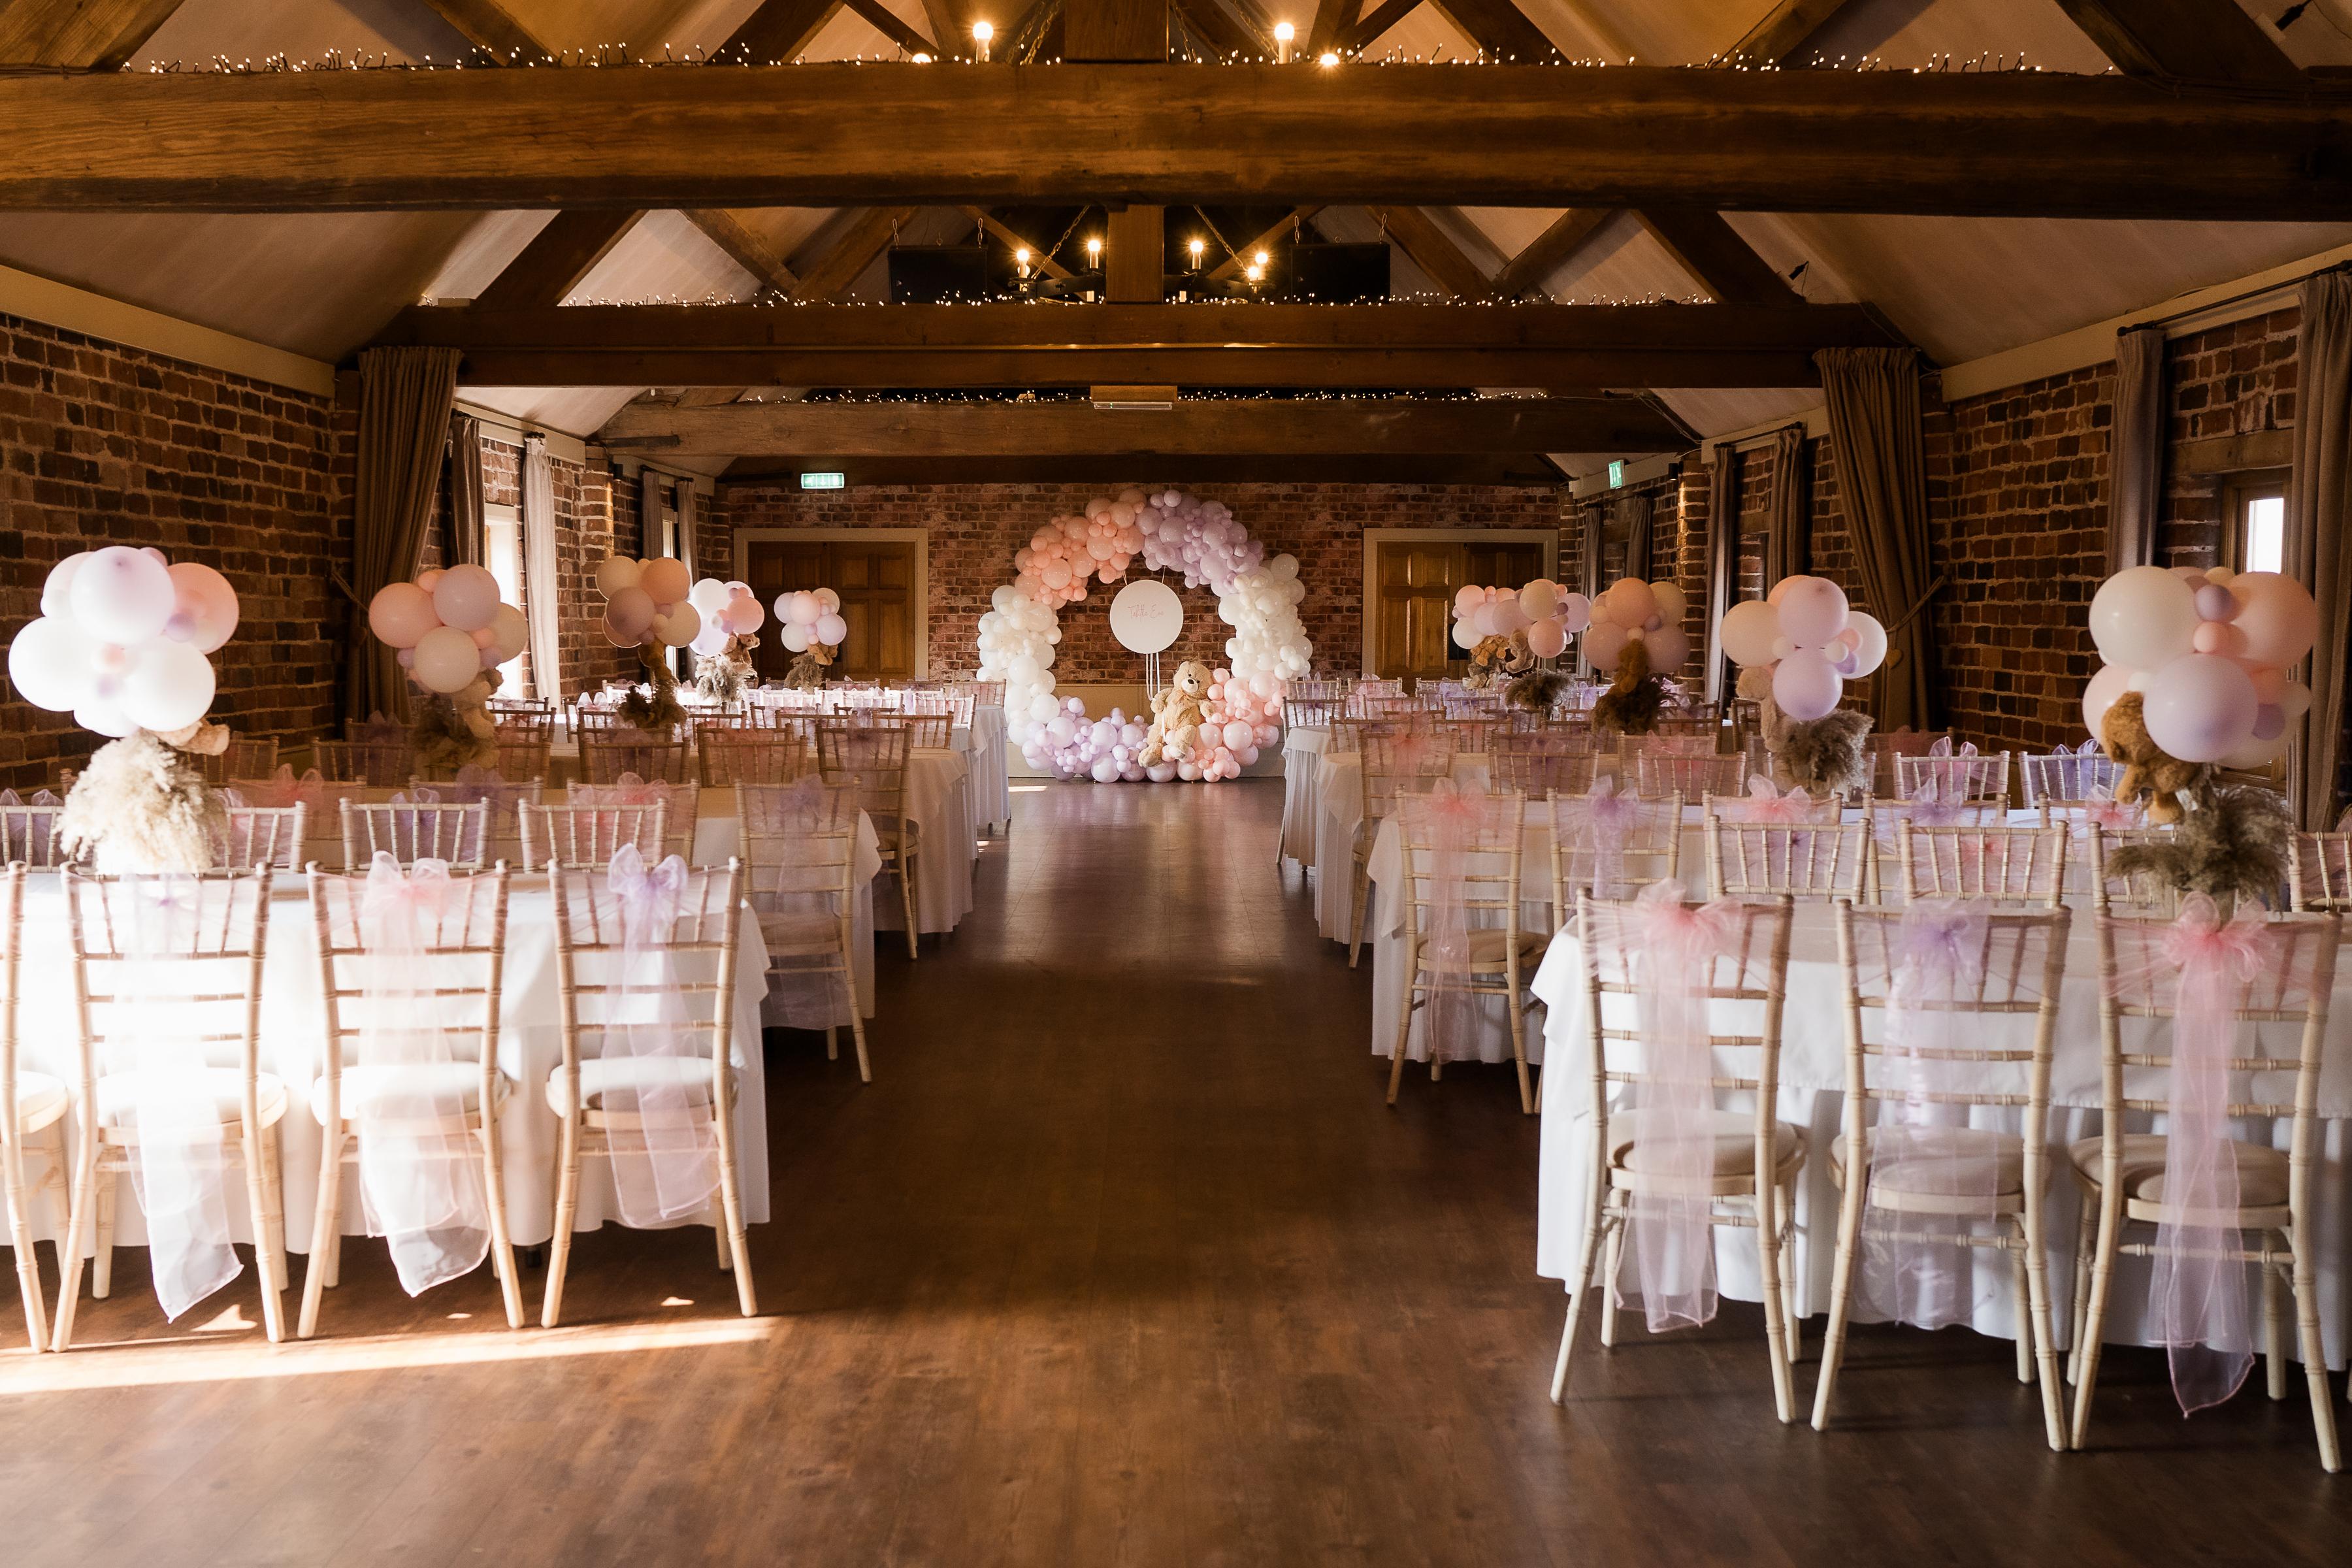 The Maltings Barn Daytime Event Hire, The Blakelands Estate photo #1